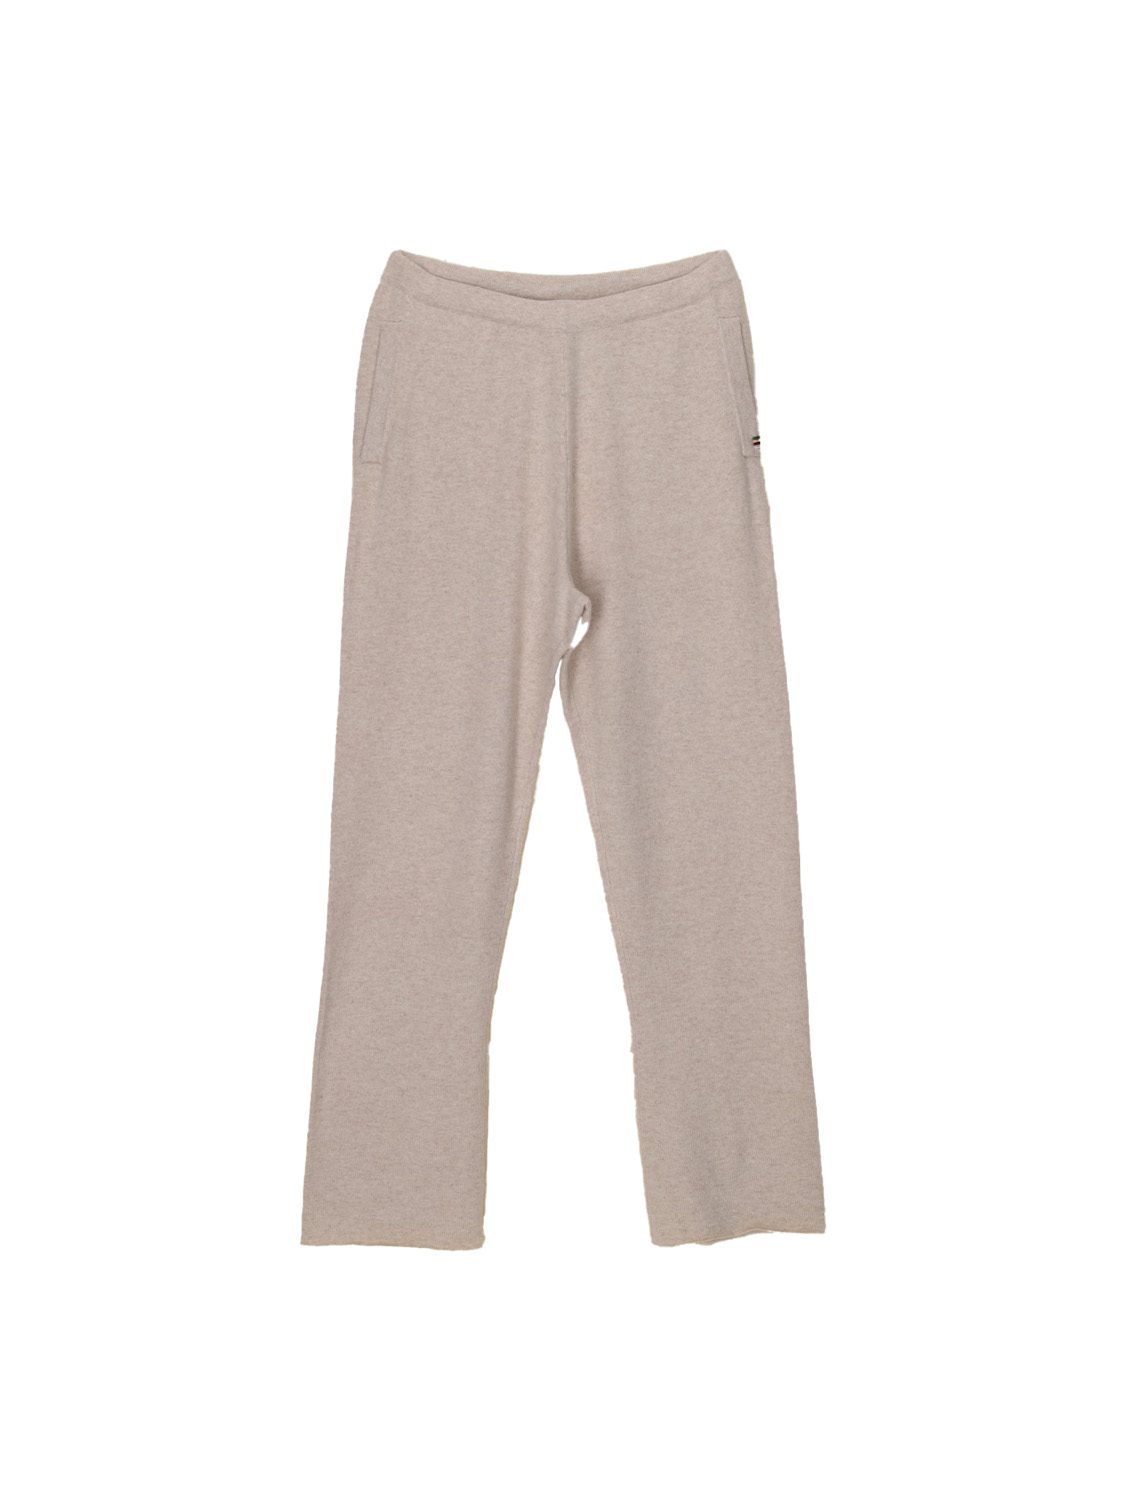 N° 320 Rush - Cashmere trousers 